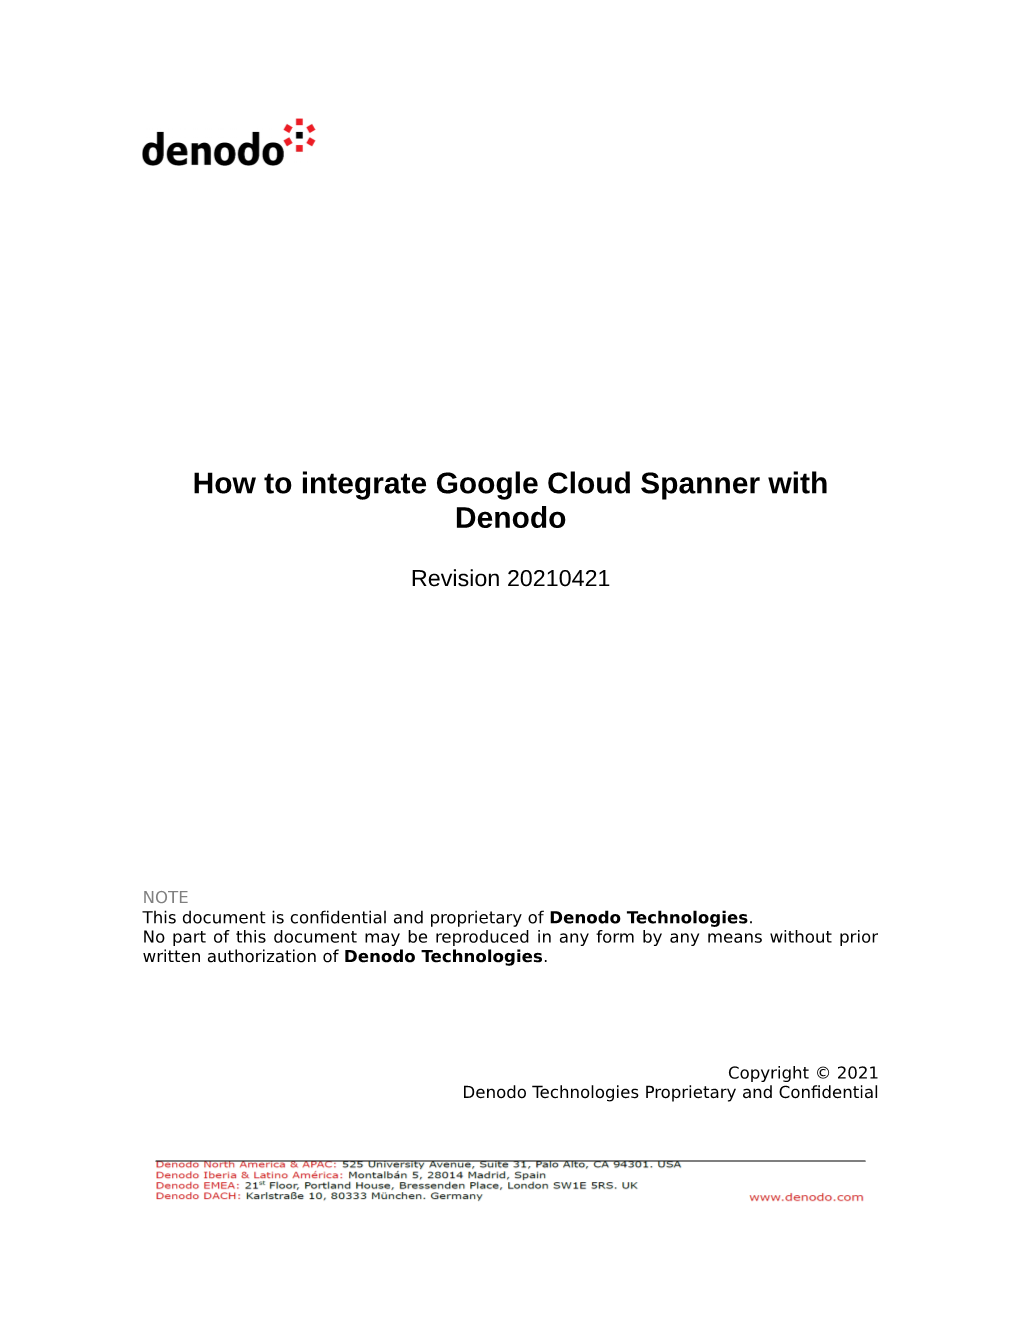 How to Integrate Google Cloud Spanner with Denodo